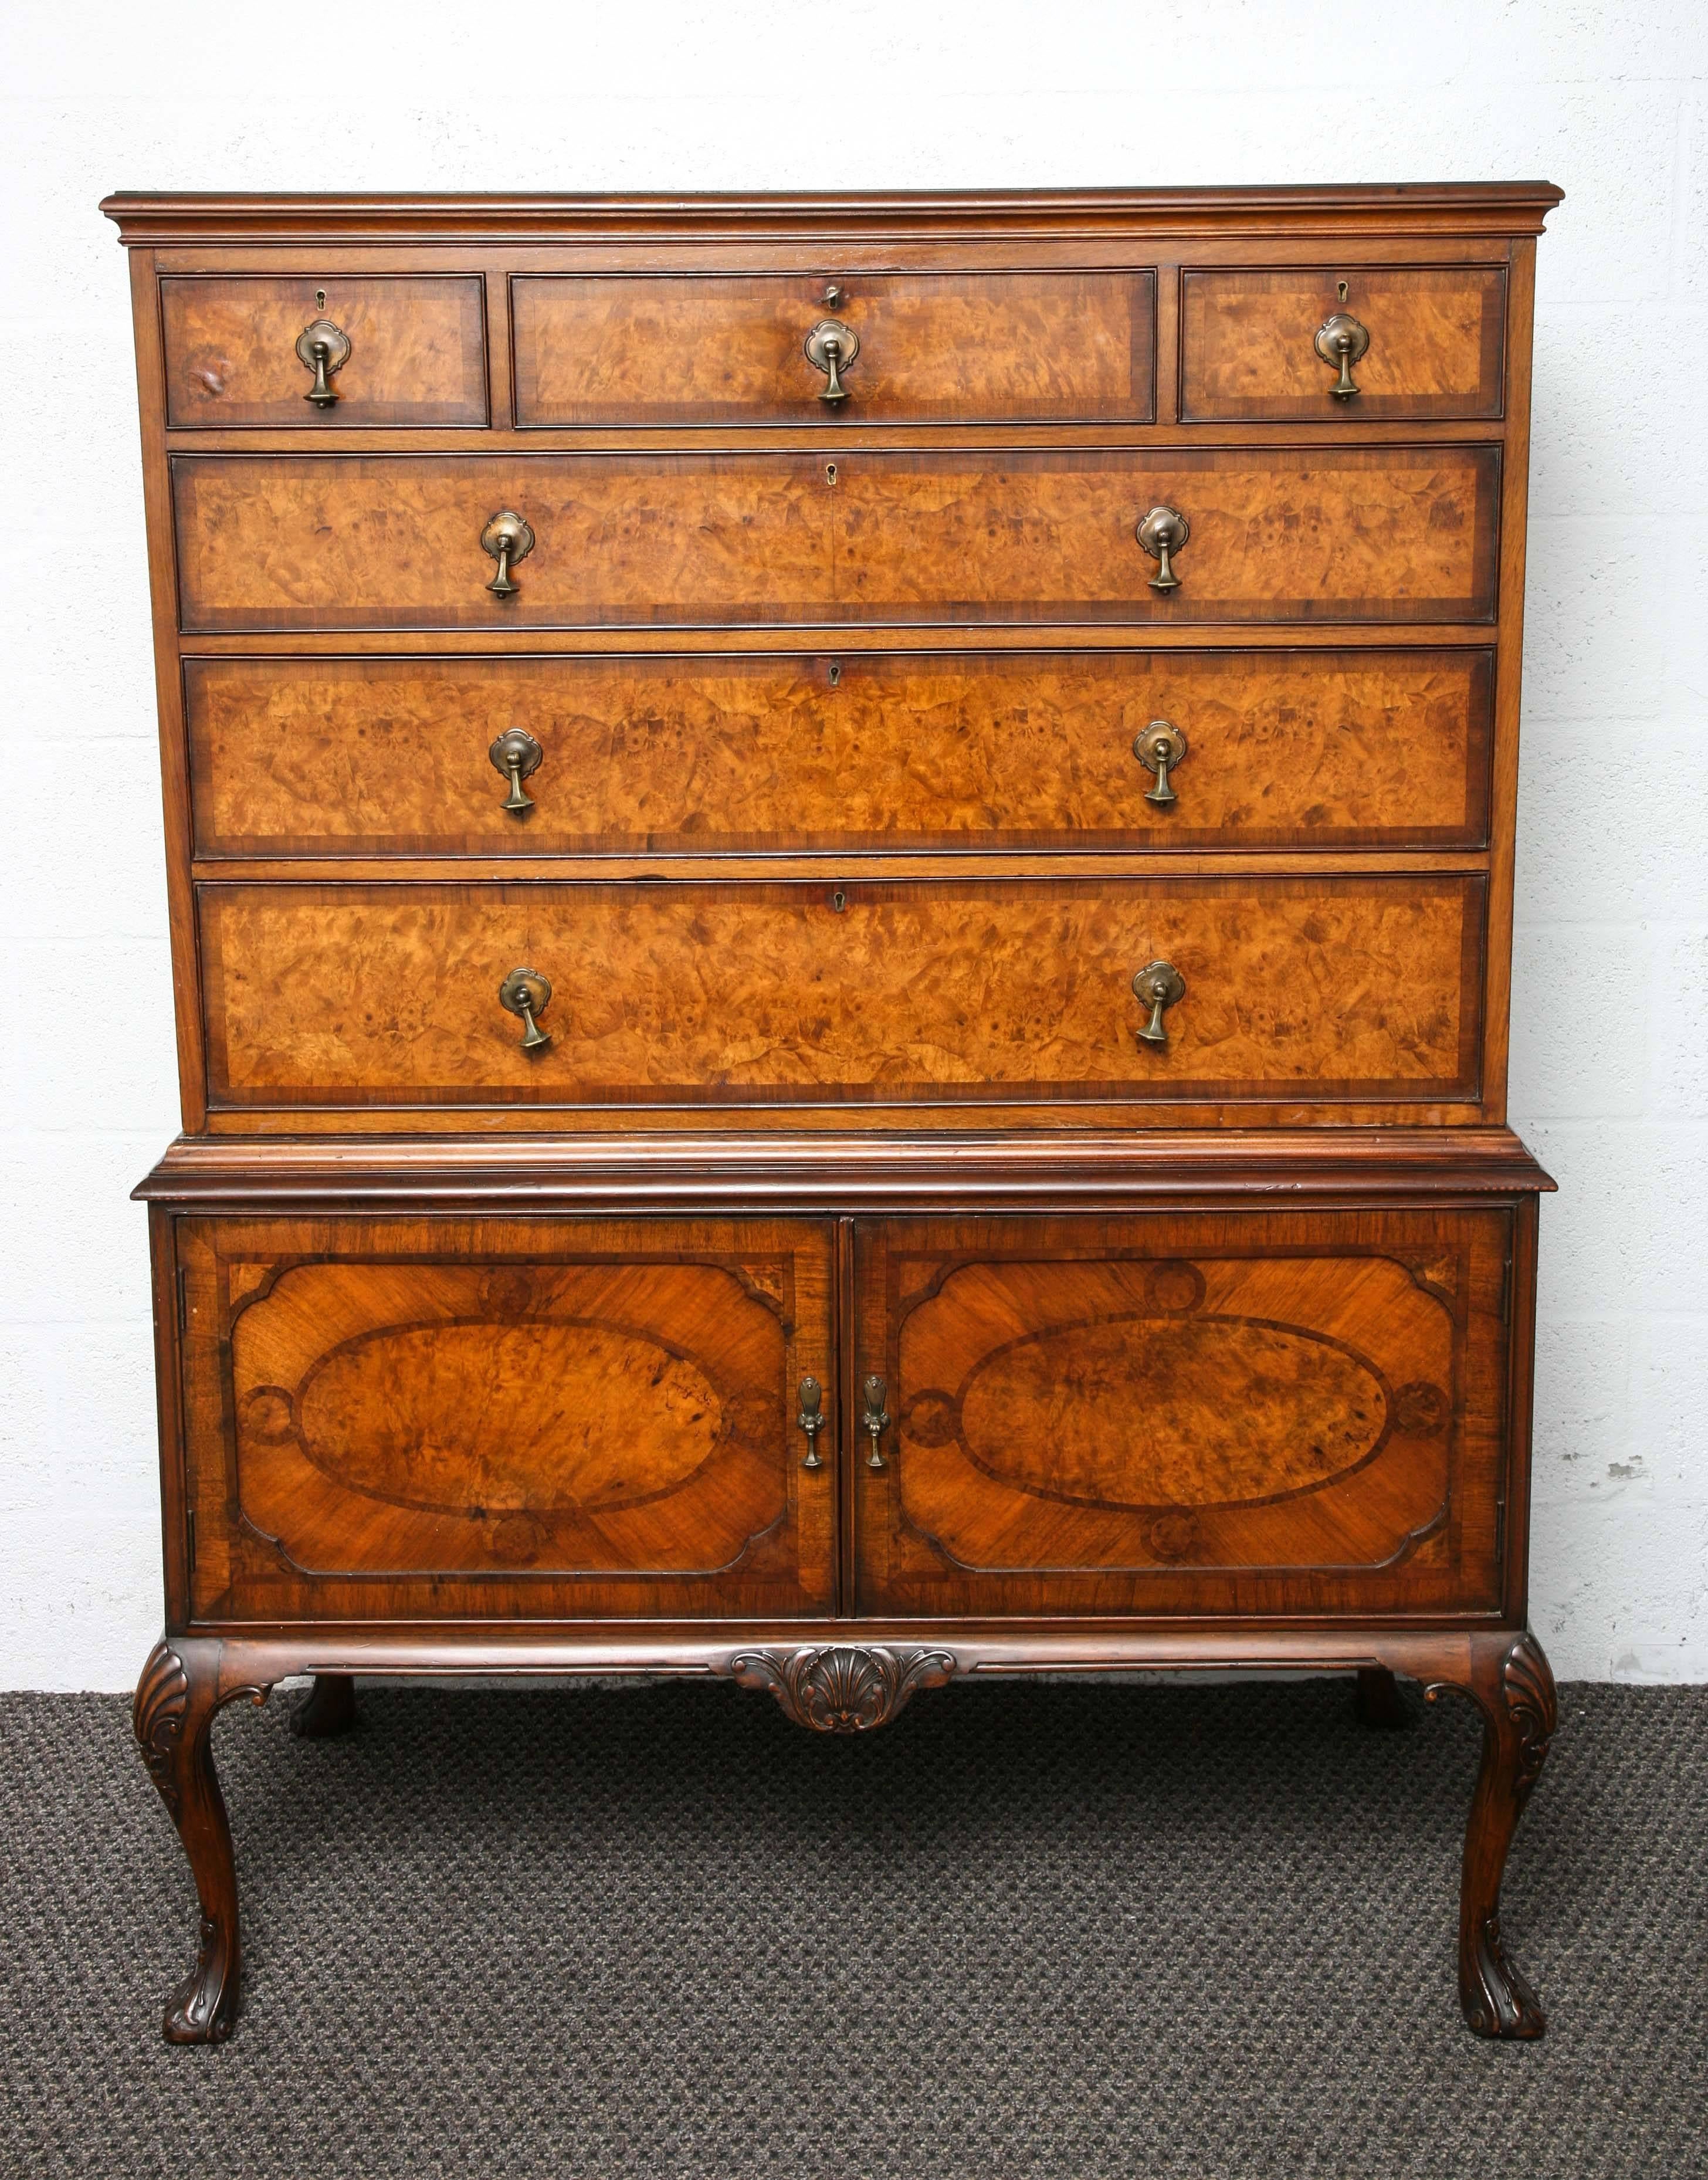 This is a superb burr walnut chest on stand which was made in England, circa 1920, it sits on Queen Anne style legs and has two-door to the base above there are drawers which are all solid wood and dovetail joints, with the original brass